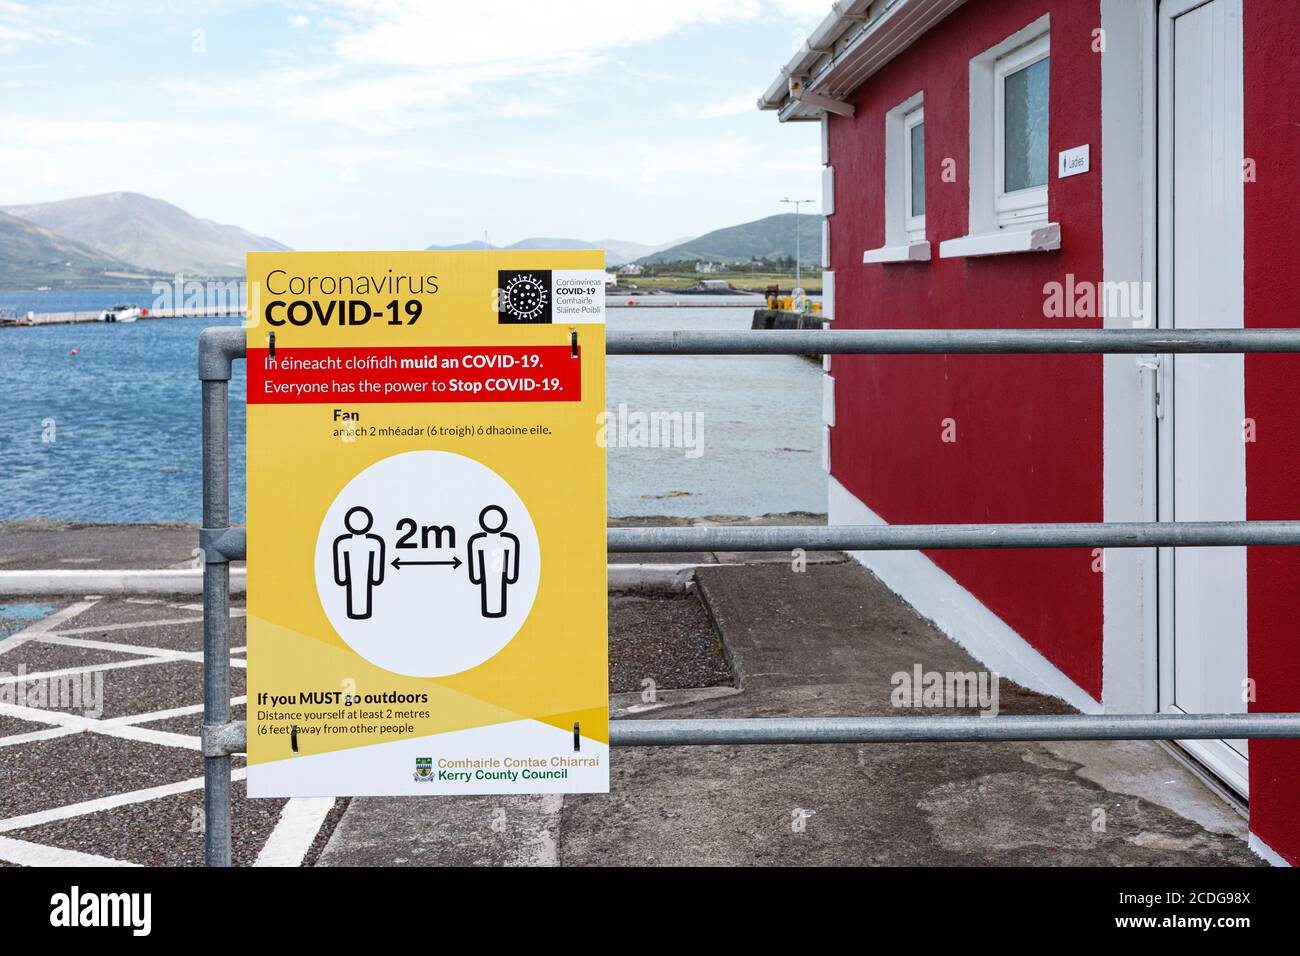 Covid-19 social distancing sign in English and Irish language, County Kerry, Ireland Stock Photo